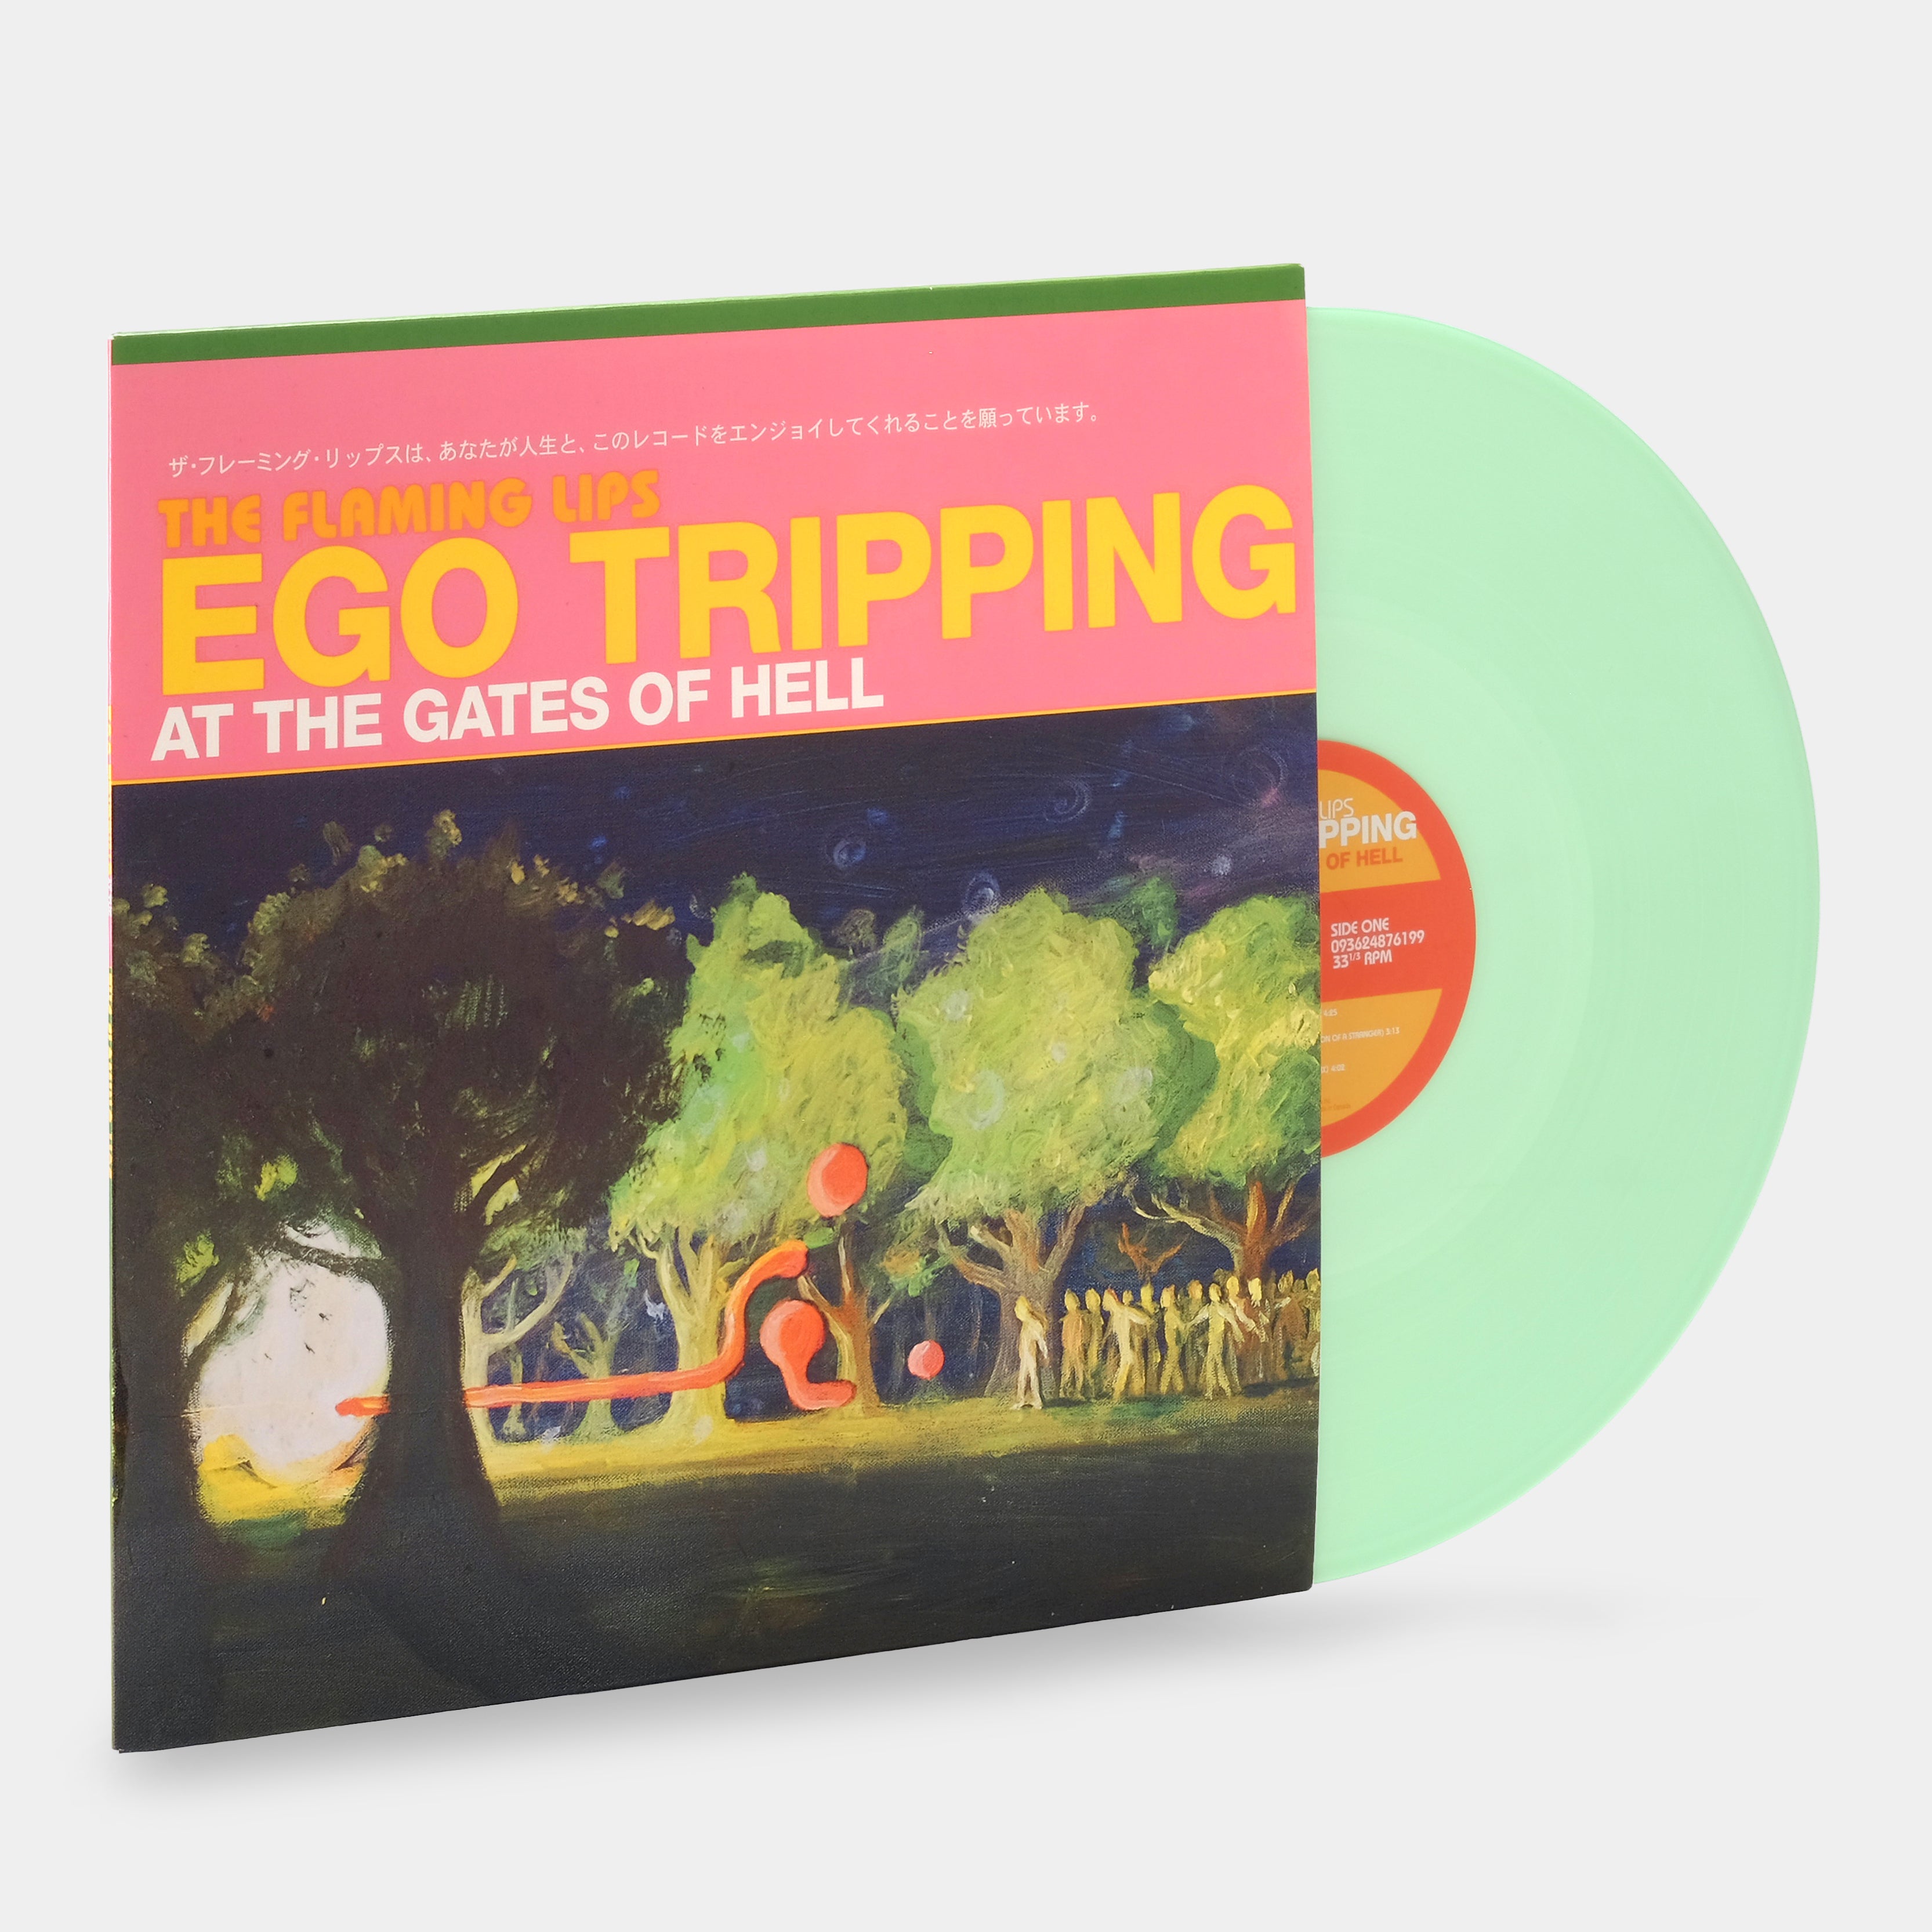 The Flaming Lips - Ego Tripping At The Gates Of Hell EP Glow in the Dark Green Vinyl Record